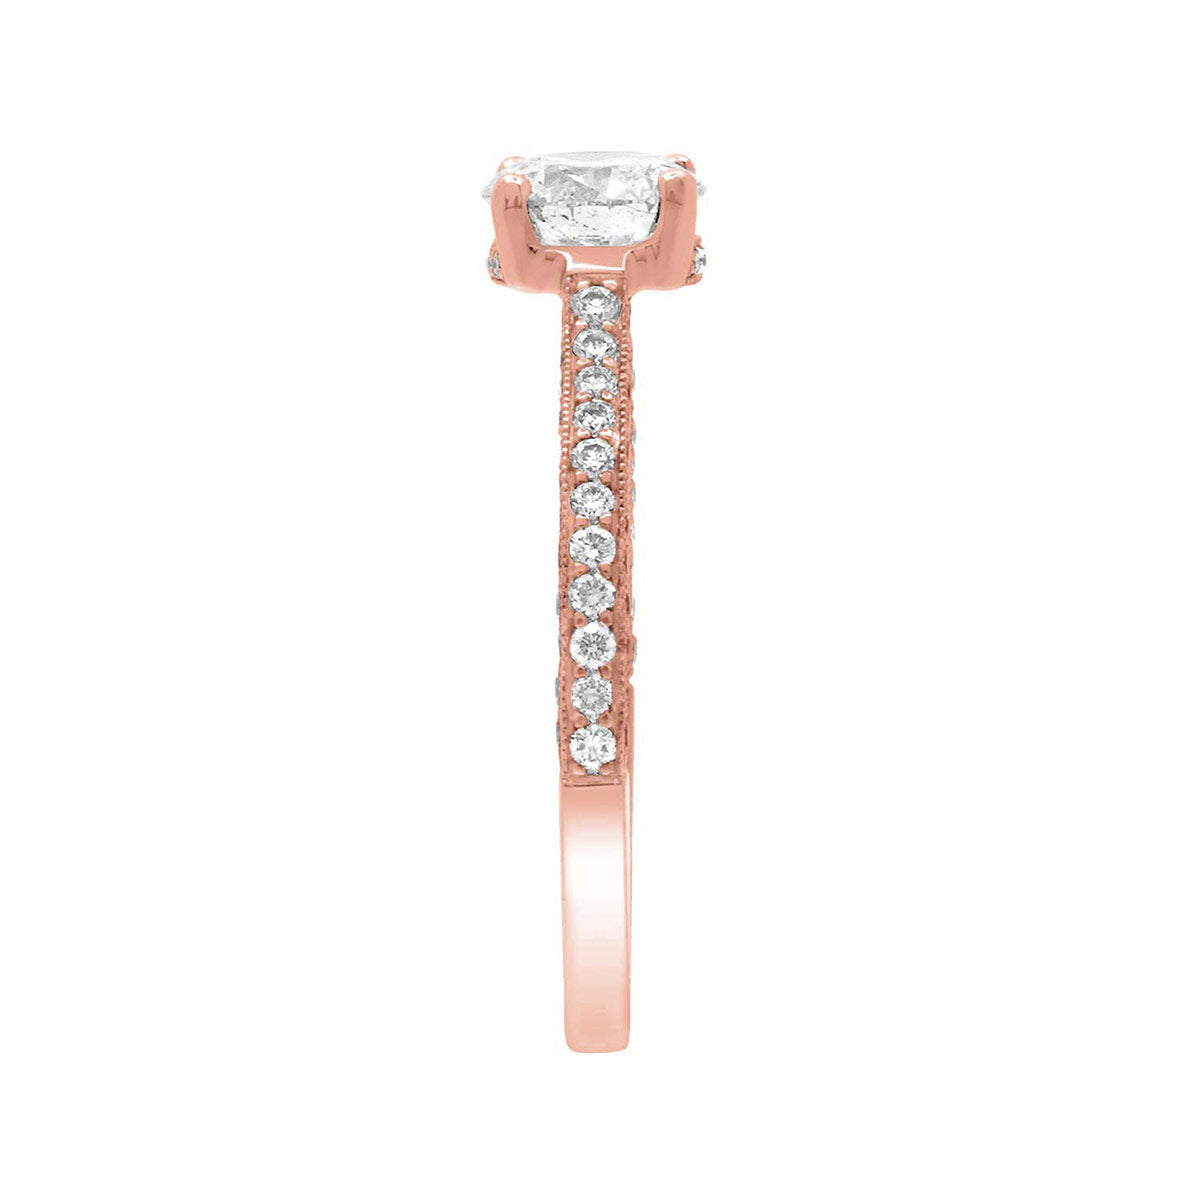 Thin Band Solitaire Ring with diamonds on sidewalls in rose gold pictured in an end view position